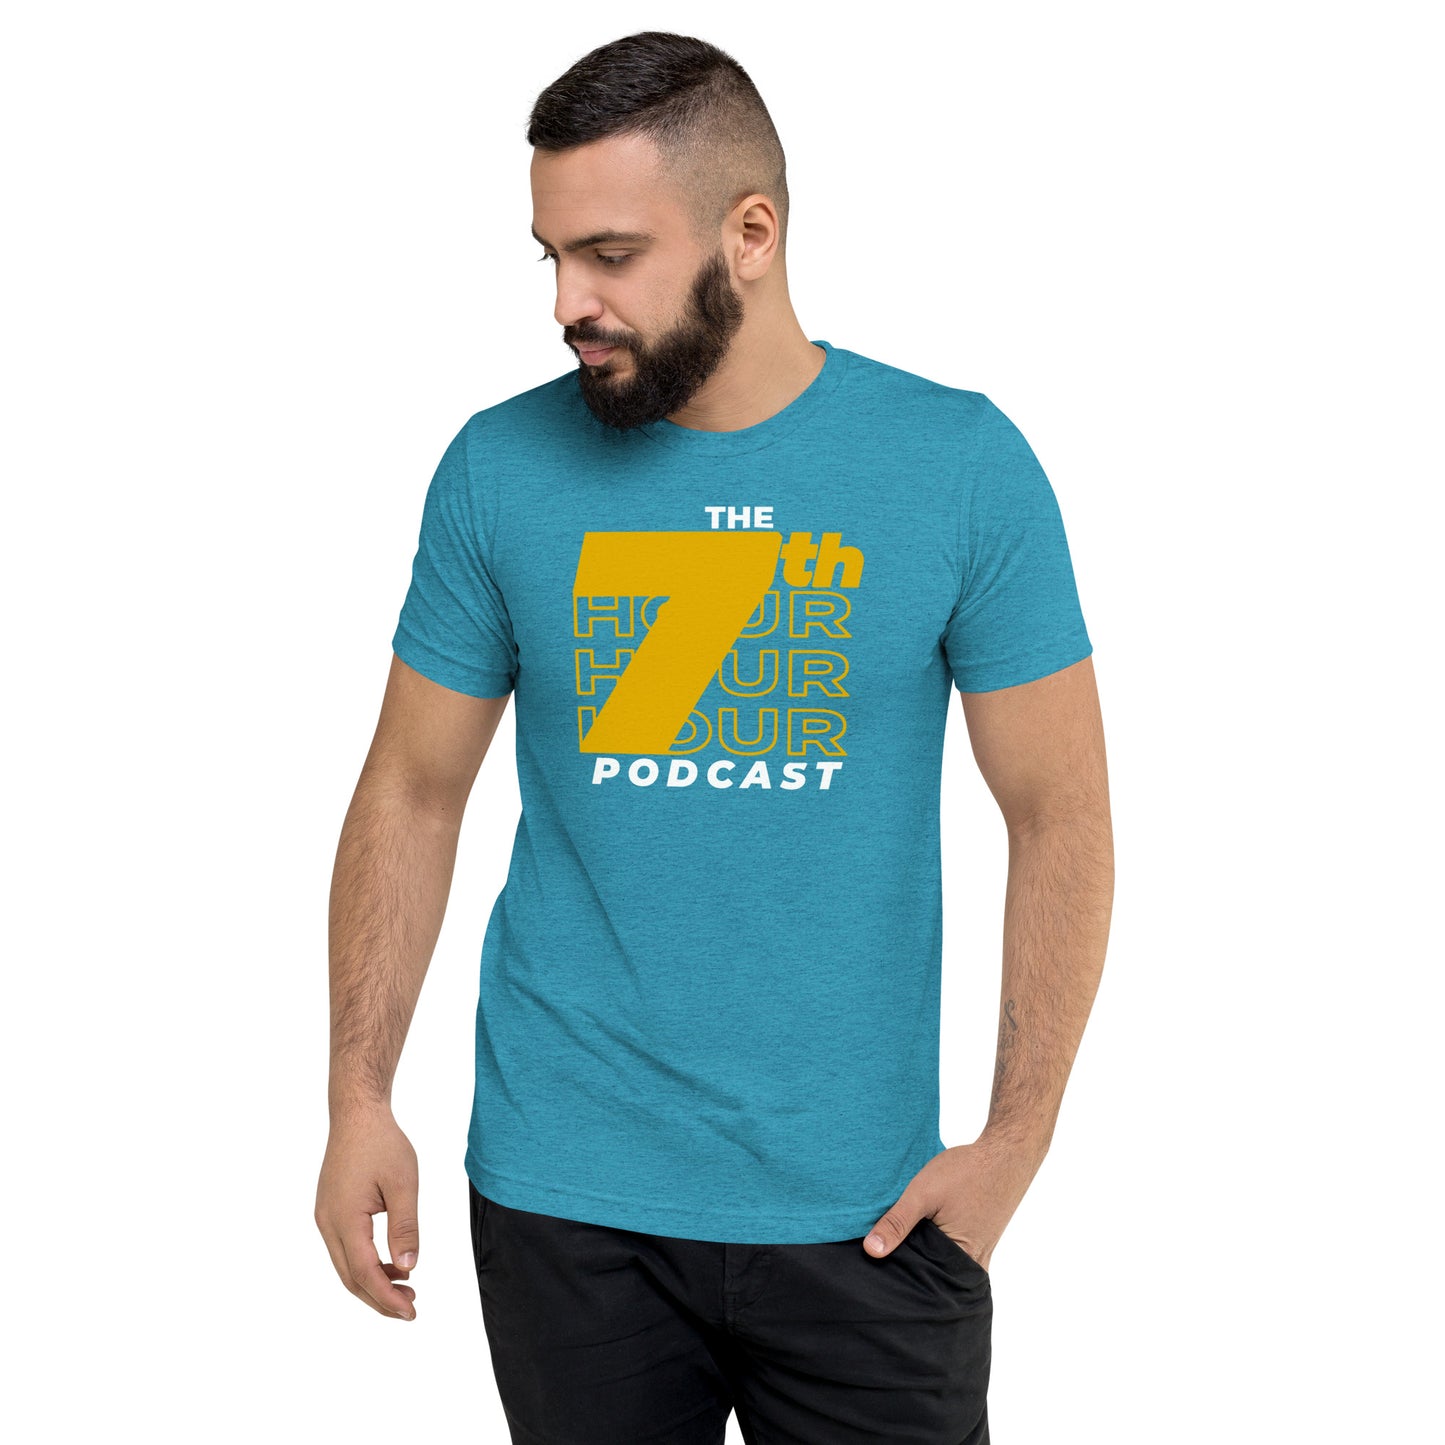 7th Hour Podcast - Printed Super Soft Triblend -Short sleeve t-shirt